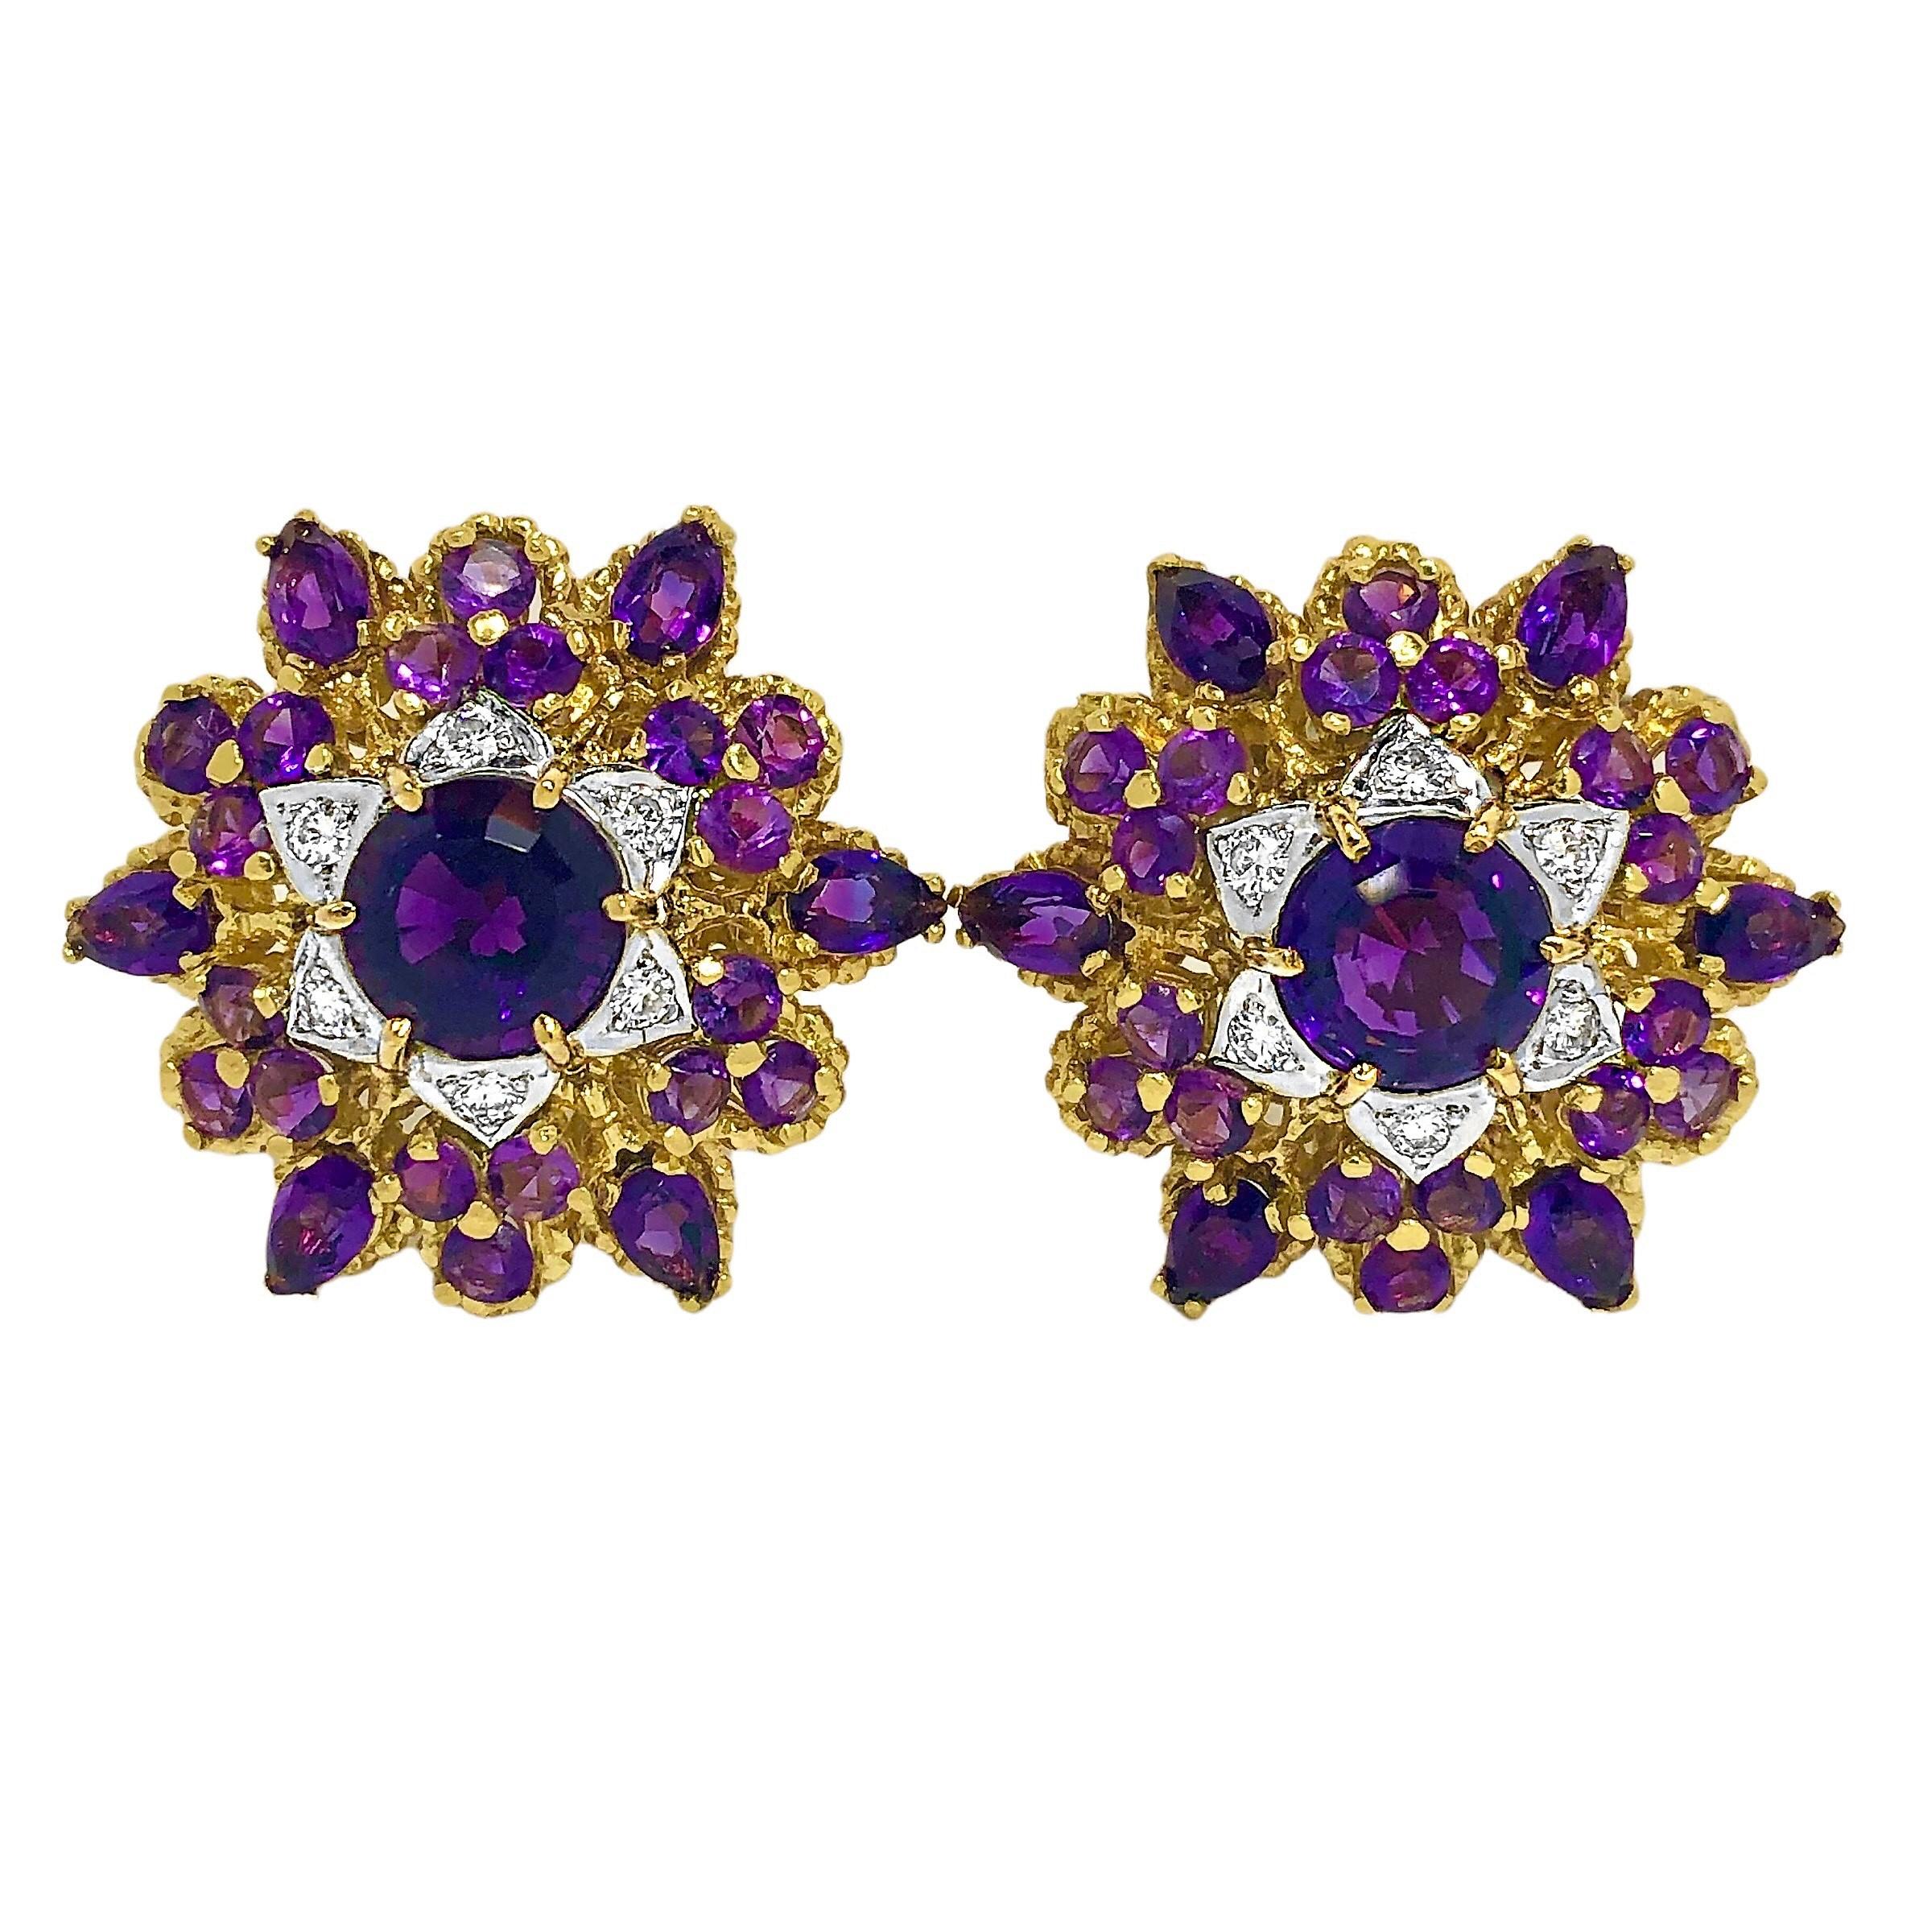 This very well crafted pair of vintage 18K yellow gold earrings is liberally set with round and pear shaped natural amethysts. Surrounding the center stones are a total of twelve brilliant cut diamonds with a total approximate weight of .50ct and an